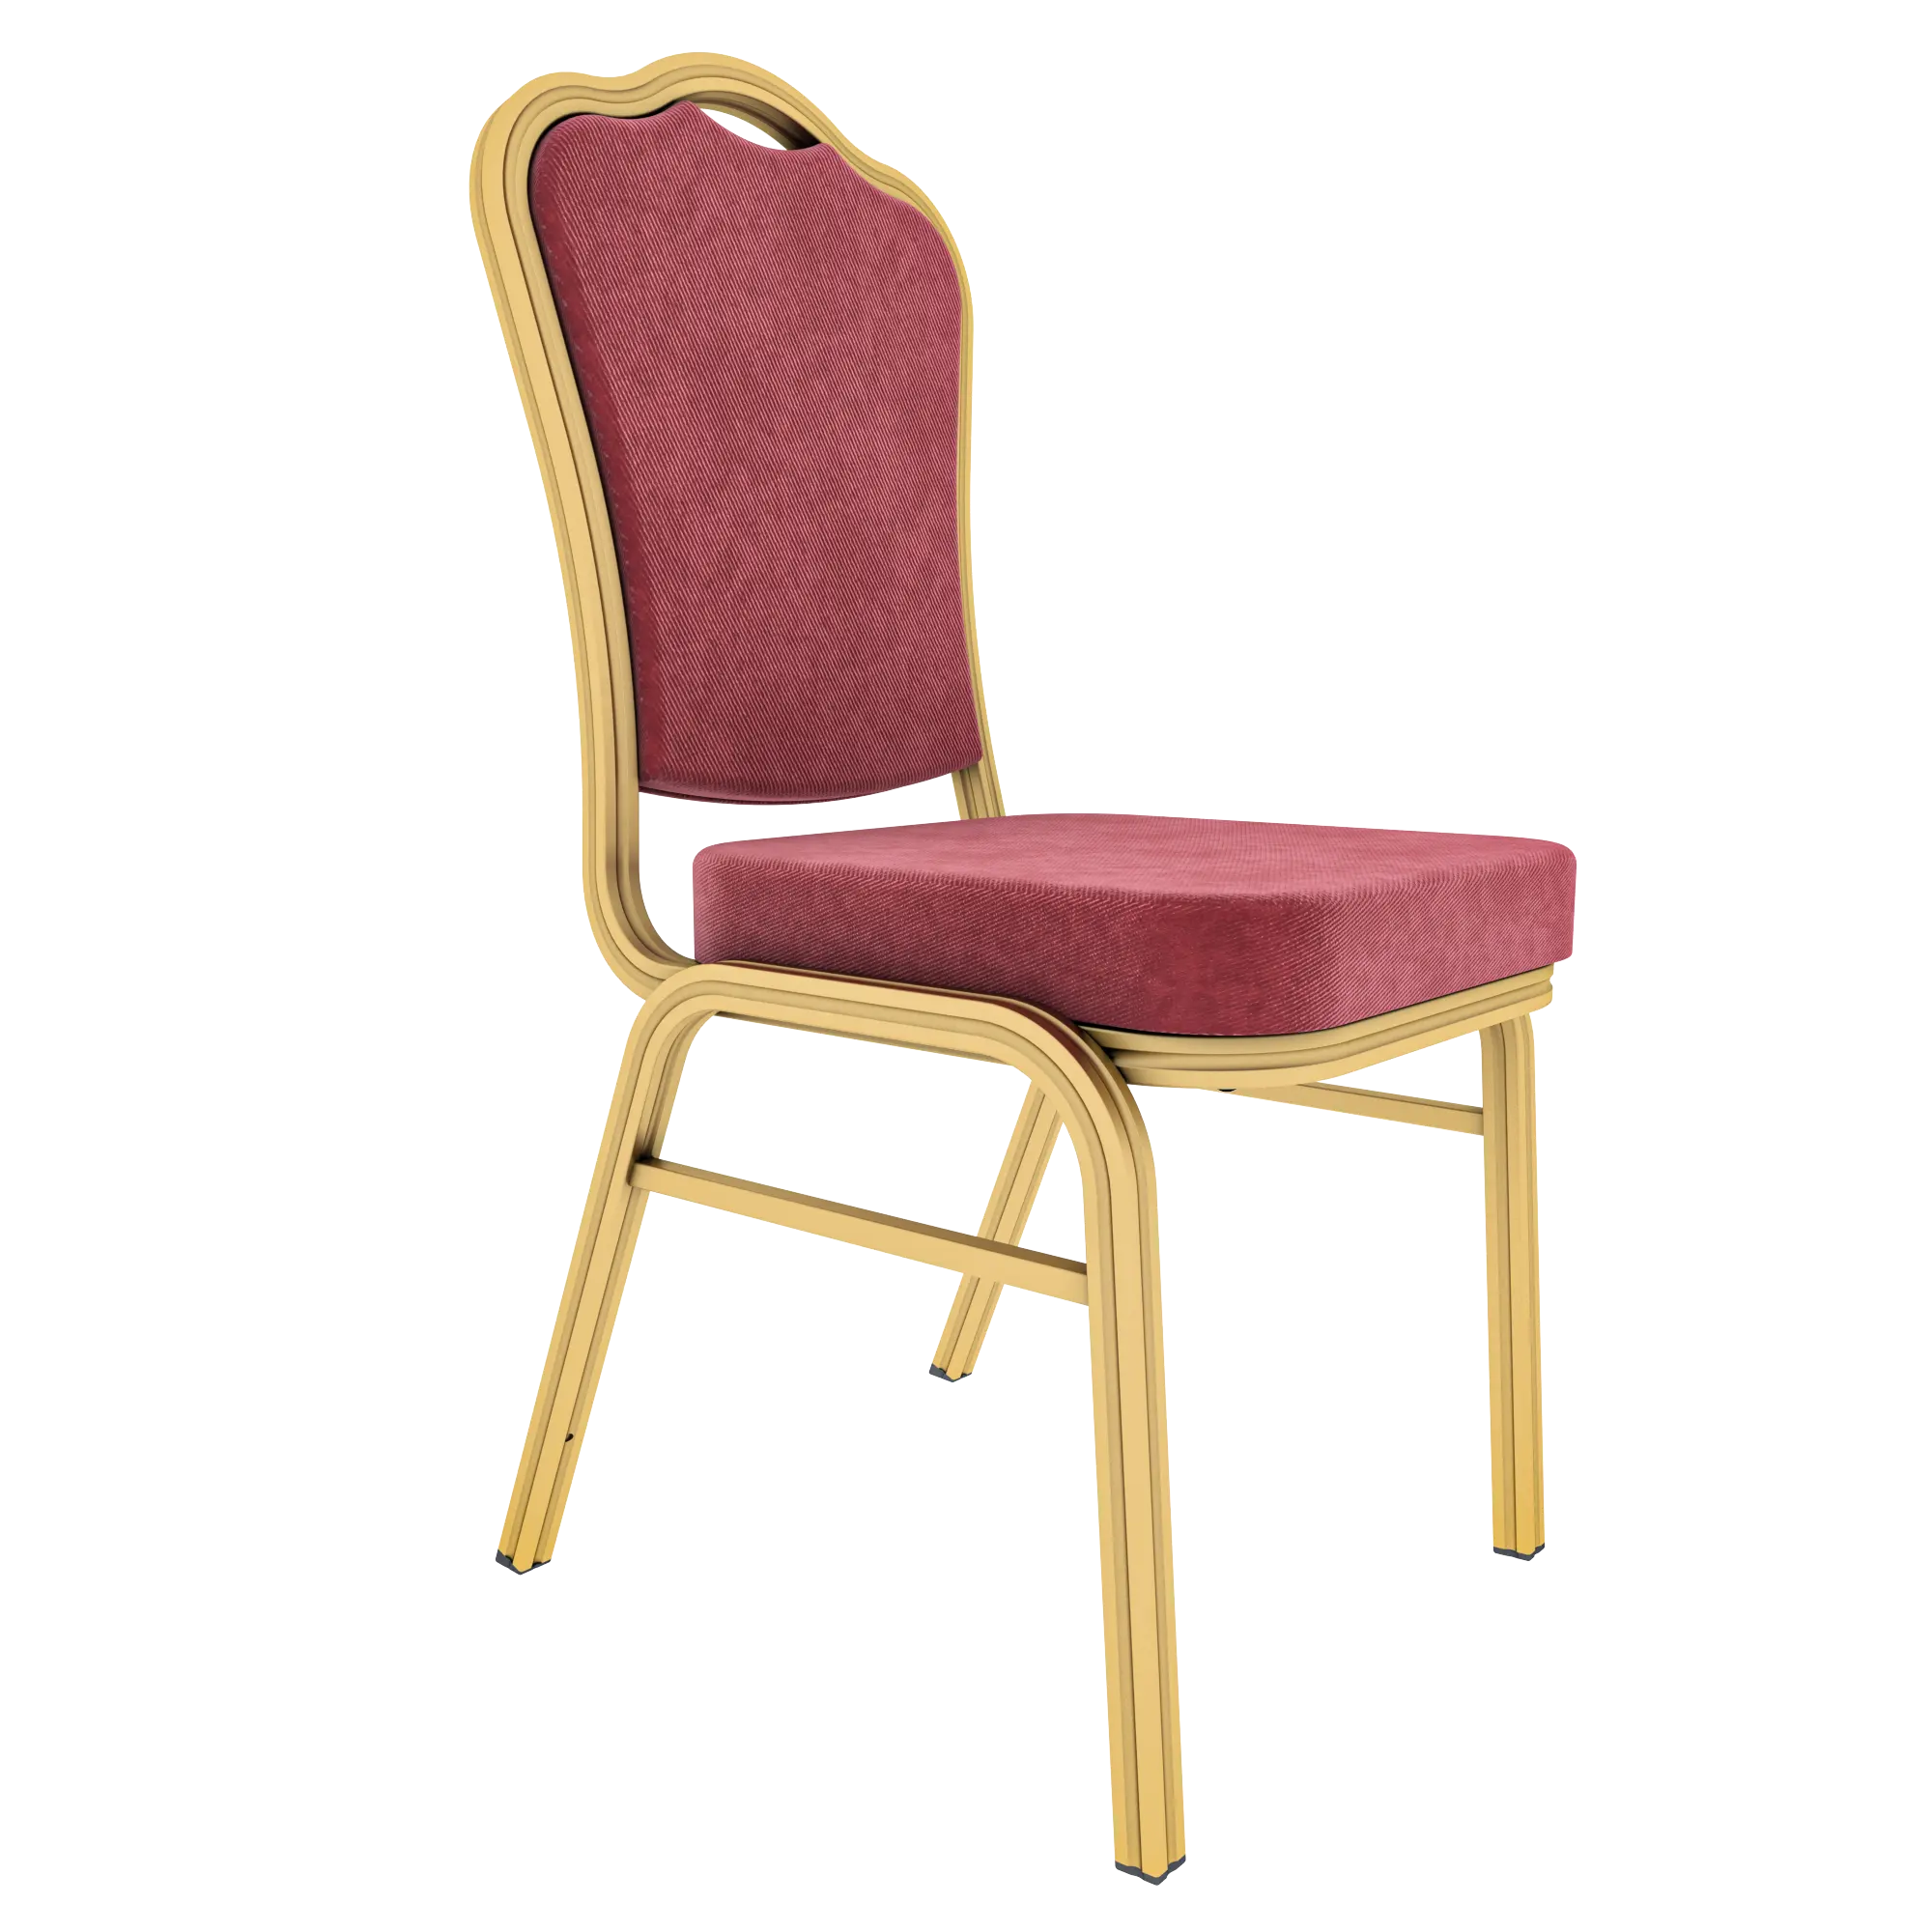 High Quality Gorgeous Elegant Wholesale Price Banquet Dinner Party Chairs For Restaurant Hotel Shipping Mall